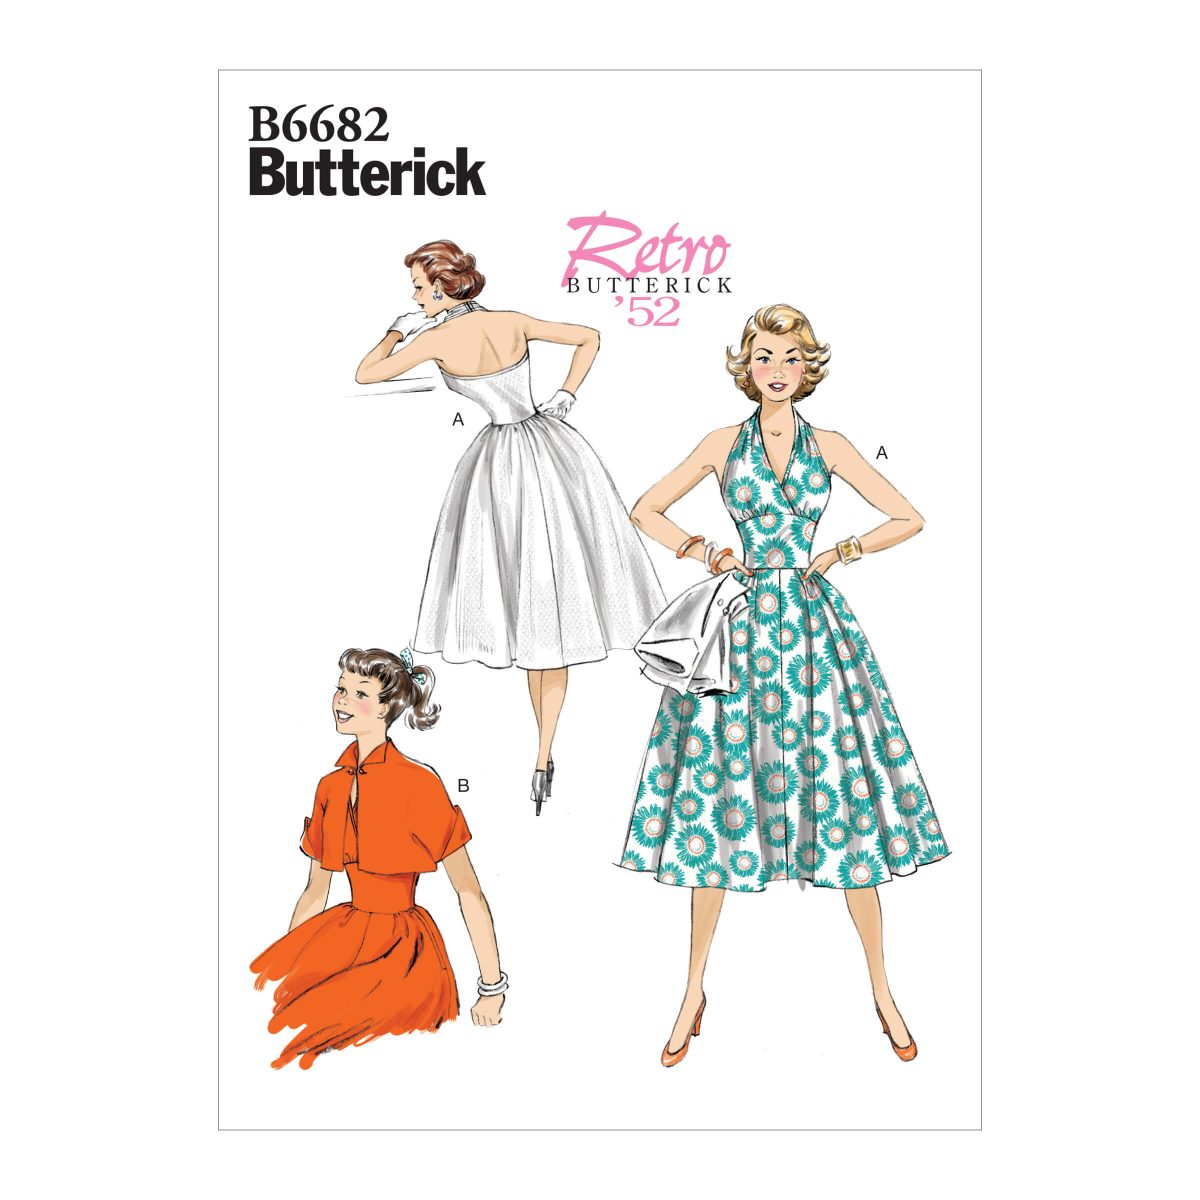 Butterick Sewing Pattern B6682 Misses' Dress and Jacket Retro '52